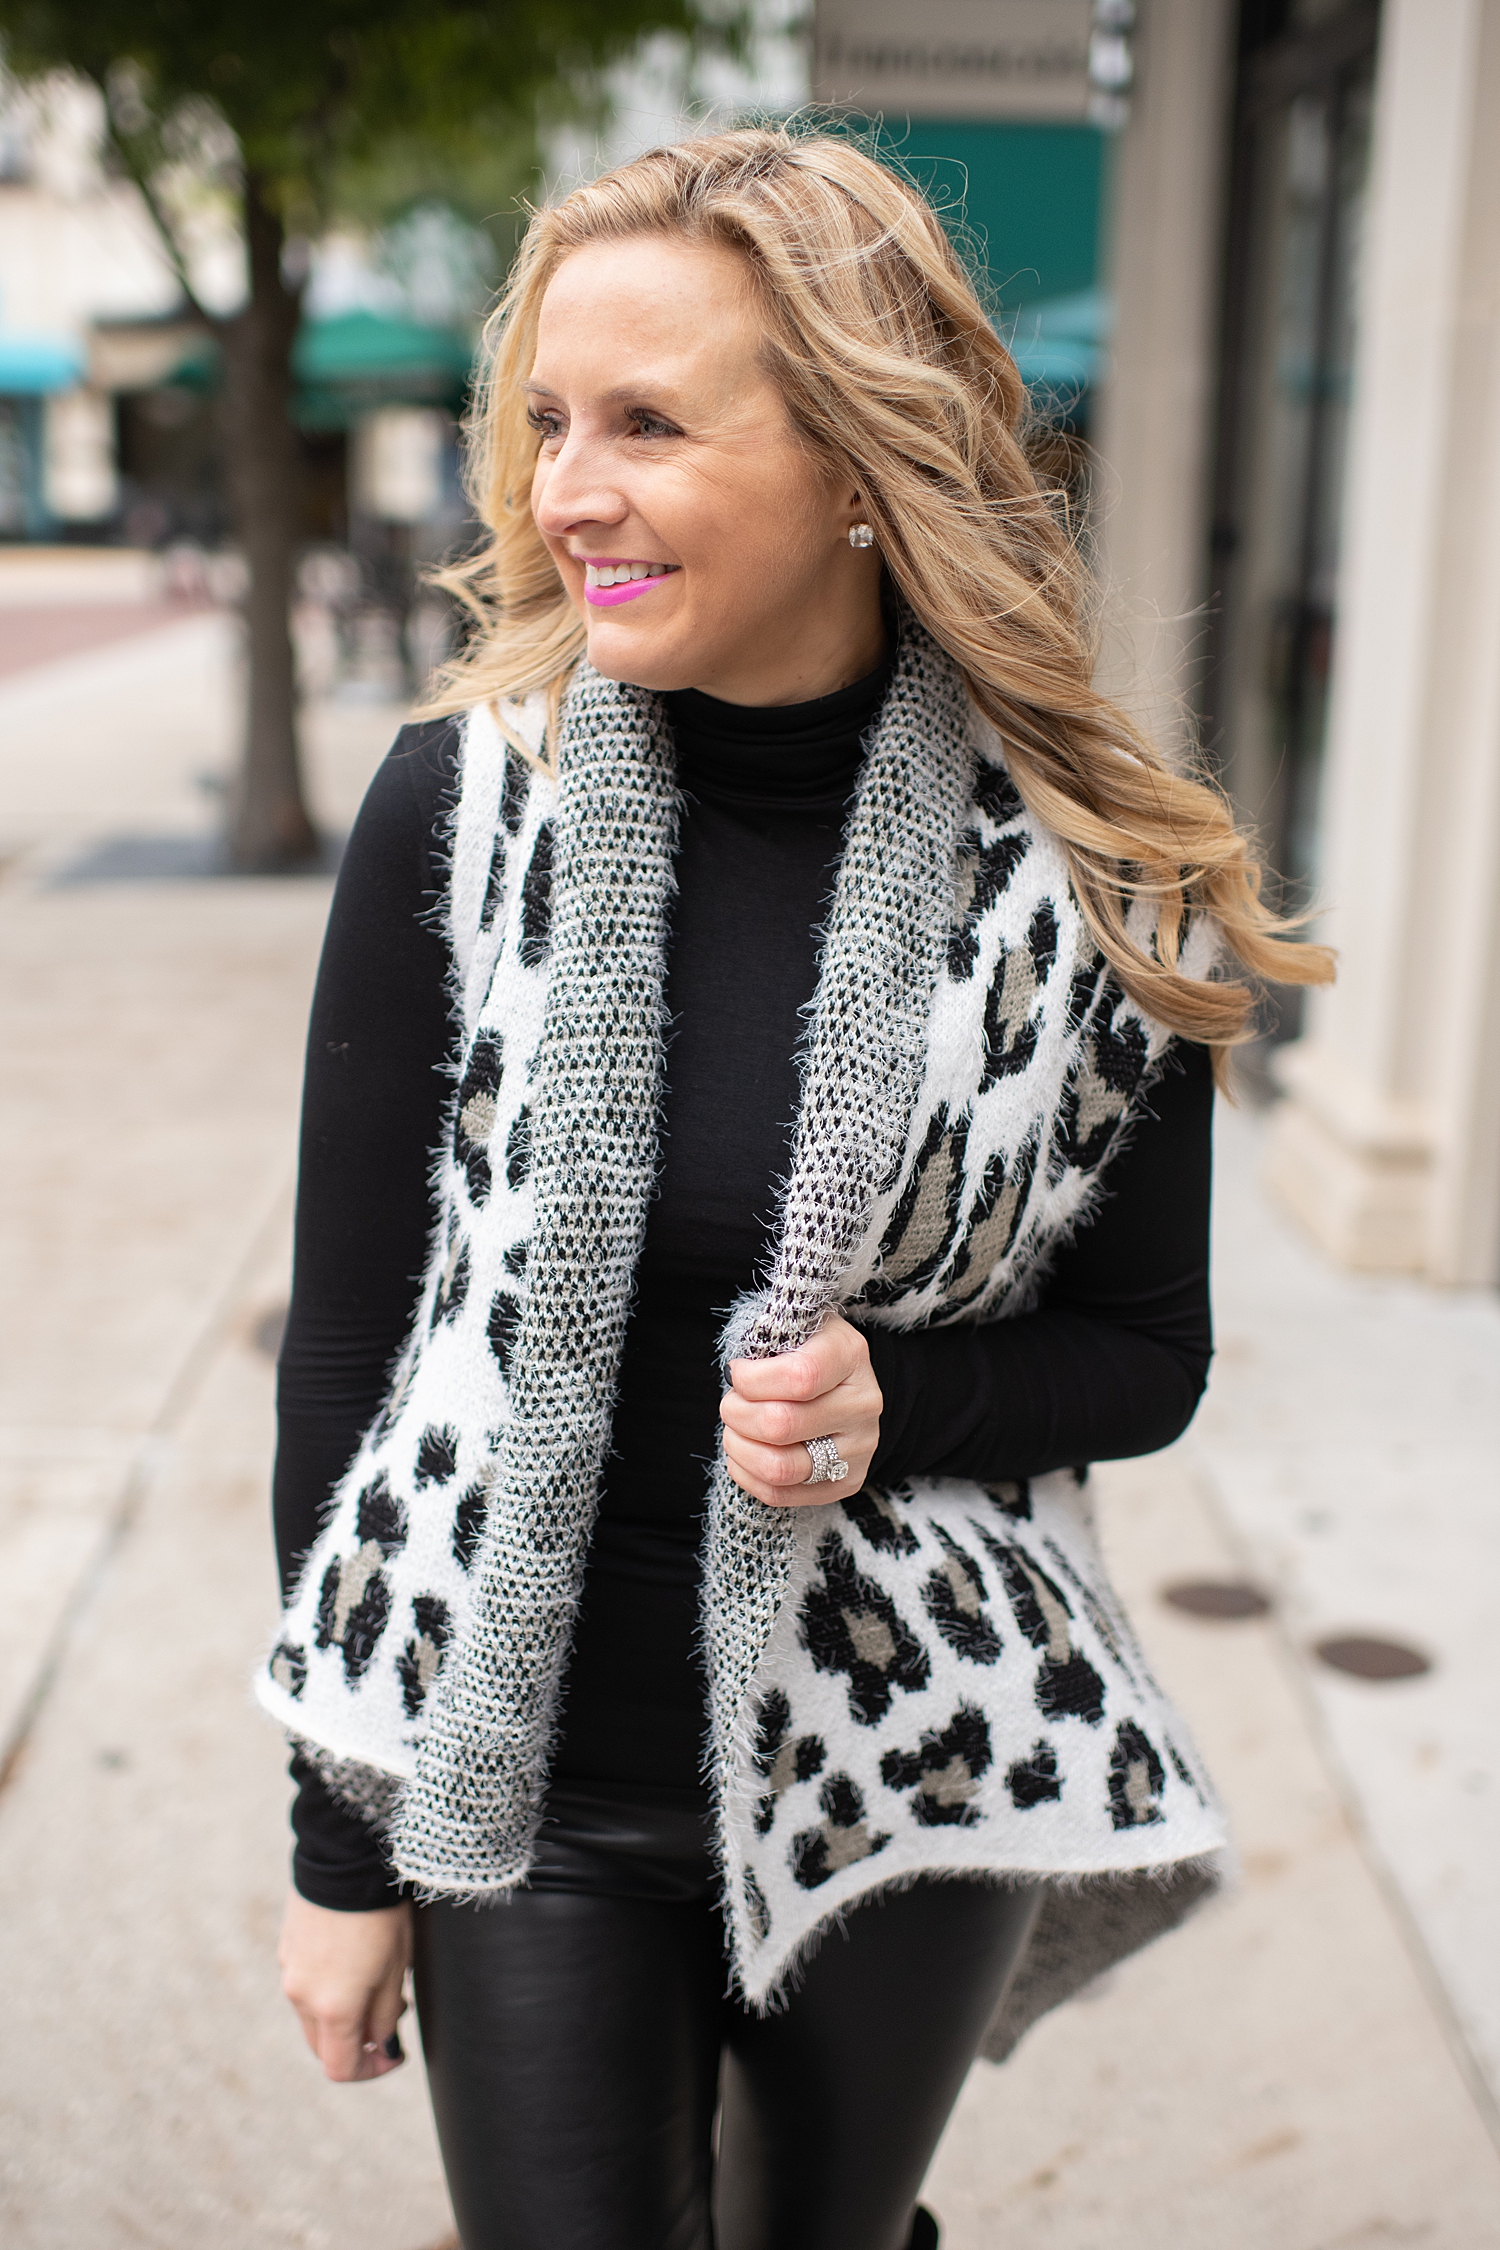 Fancy Ashley x Social Threads collection featured by top Houston fashion blogger, Fancy Ashley: image of a woman wearing a Social Threads Leopard vest, Social Threads faux leather leggings, Social Threads plaid clutch and Vince Camuto Over the Knees Boots